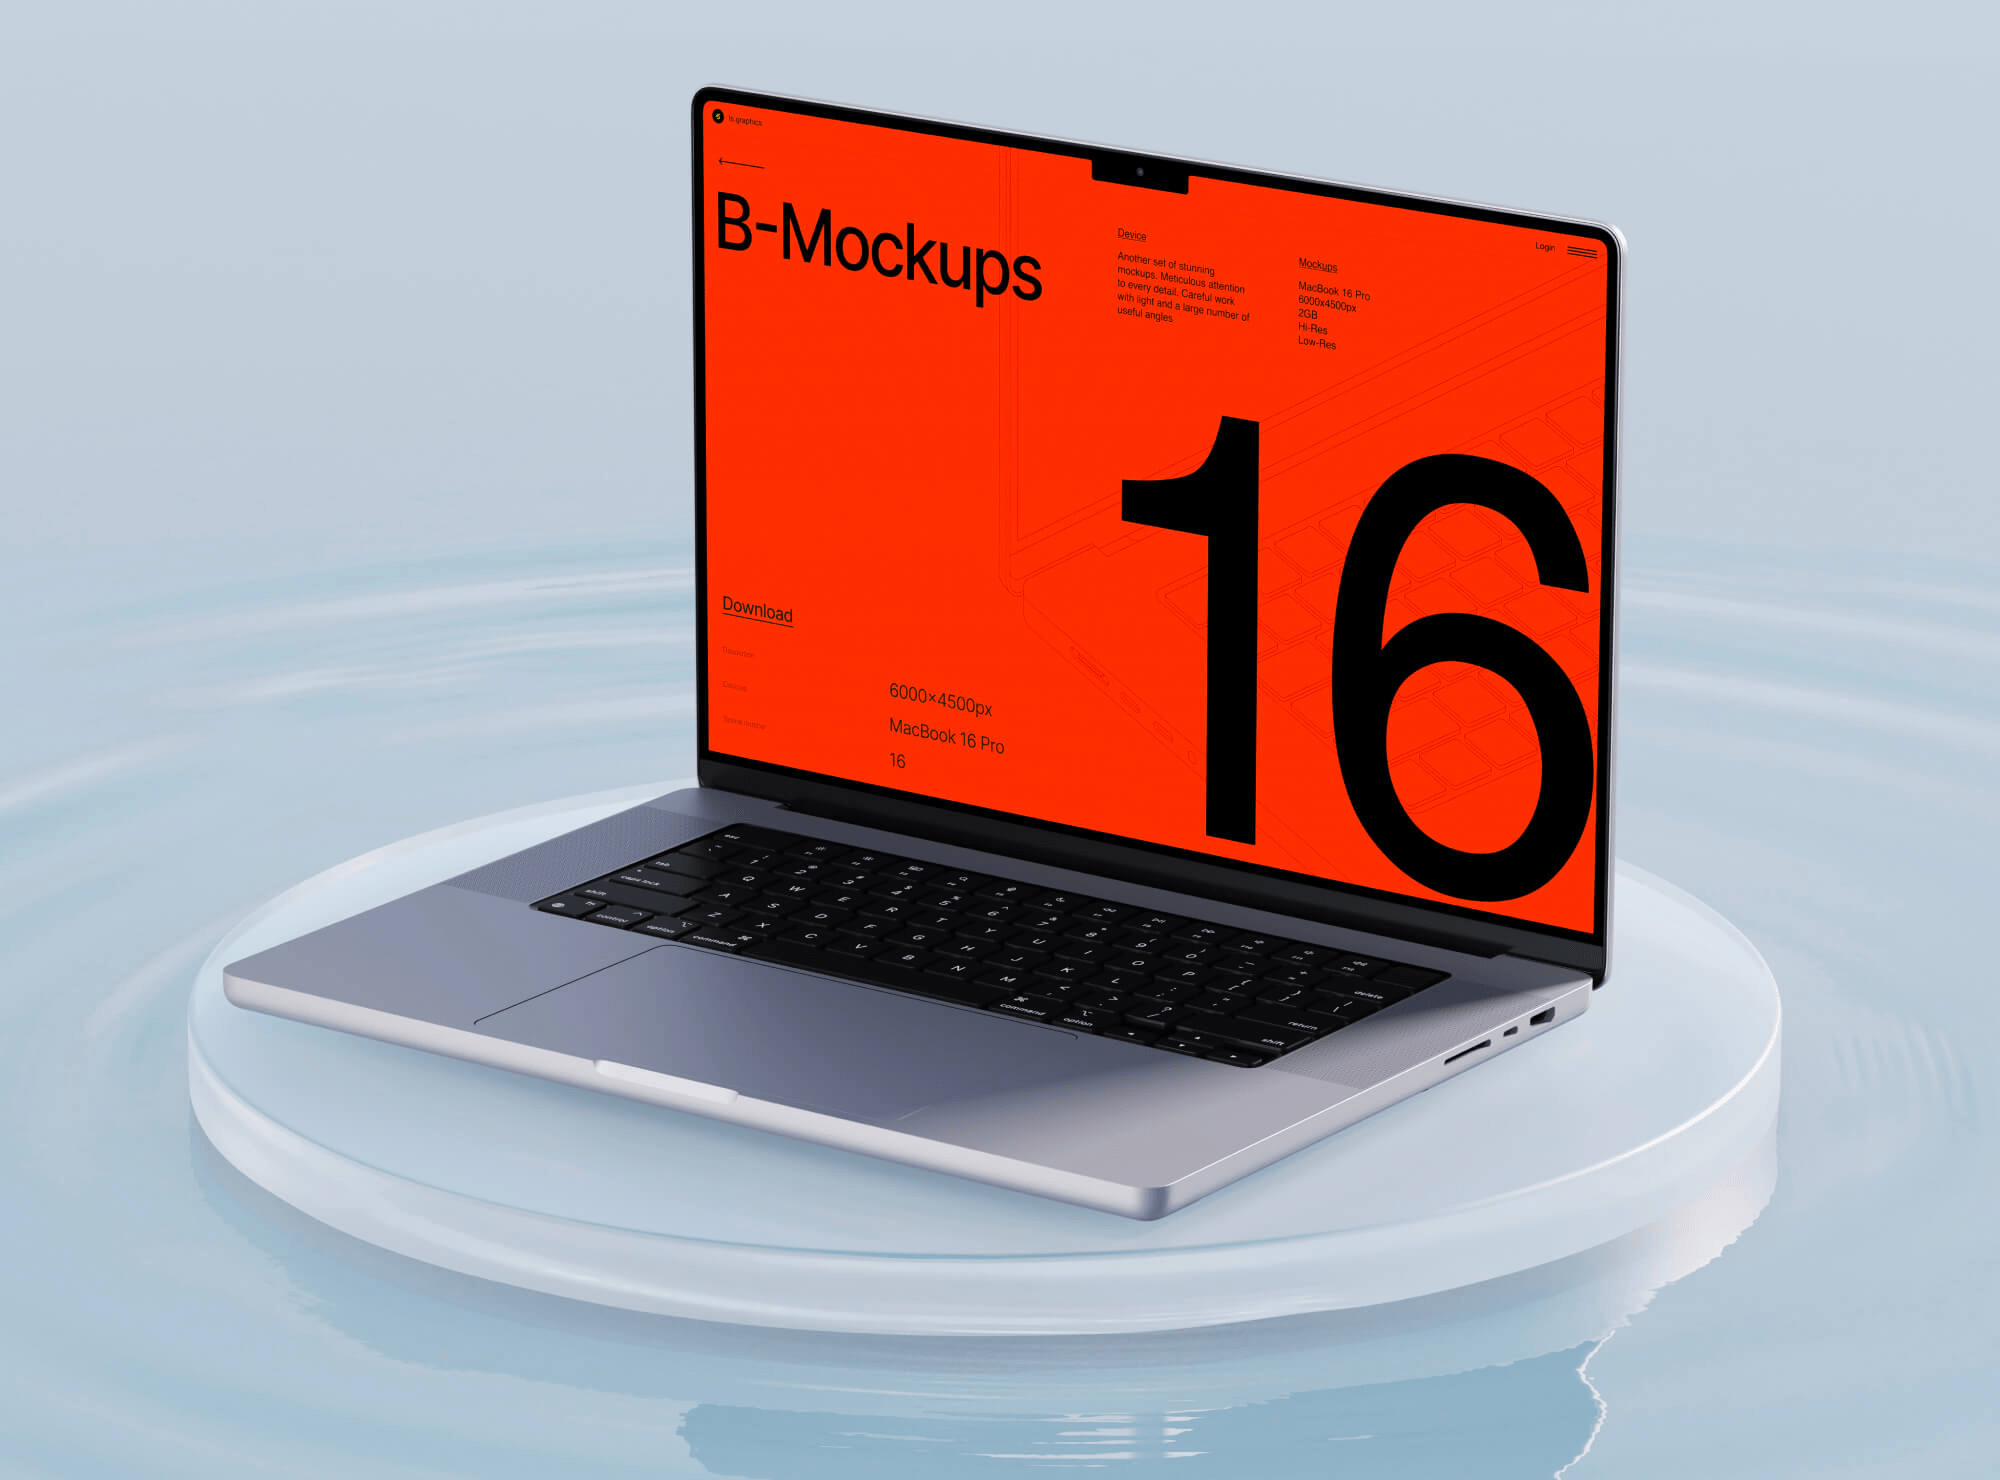 MacBook 16 Pro displayed in a stylish environment with a vivid digital design on the screen.